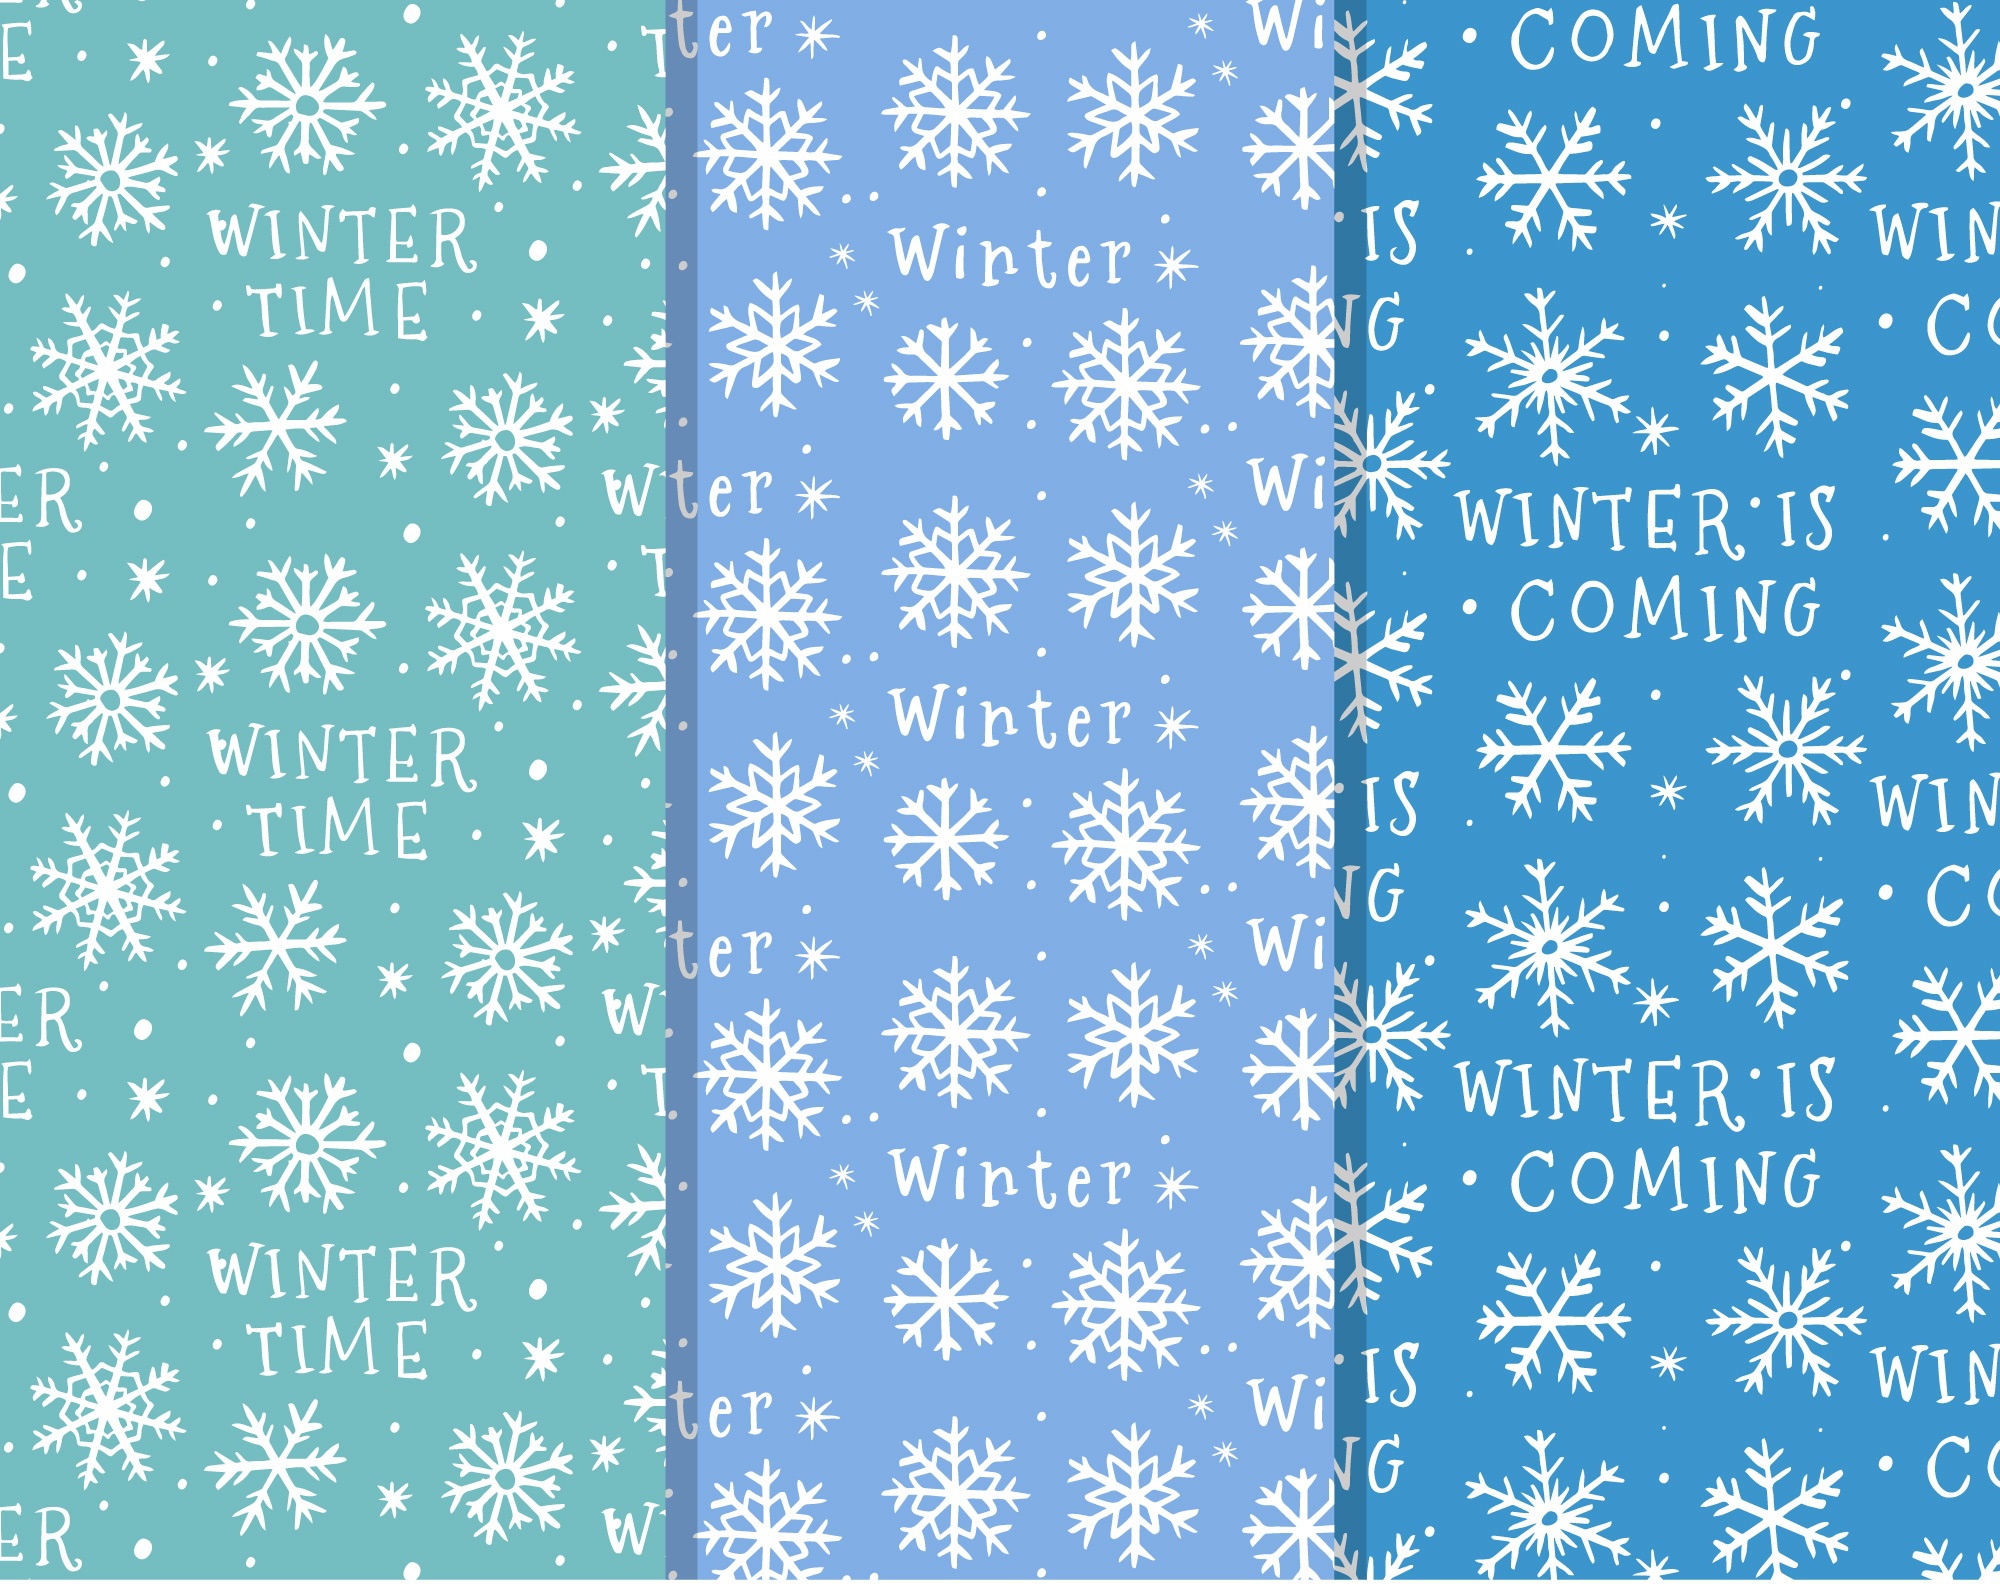 General 2000x1591 winter texture pattern blue snowflakes